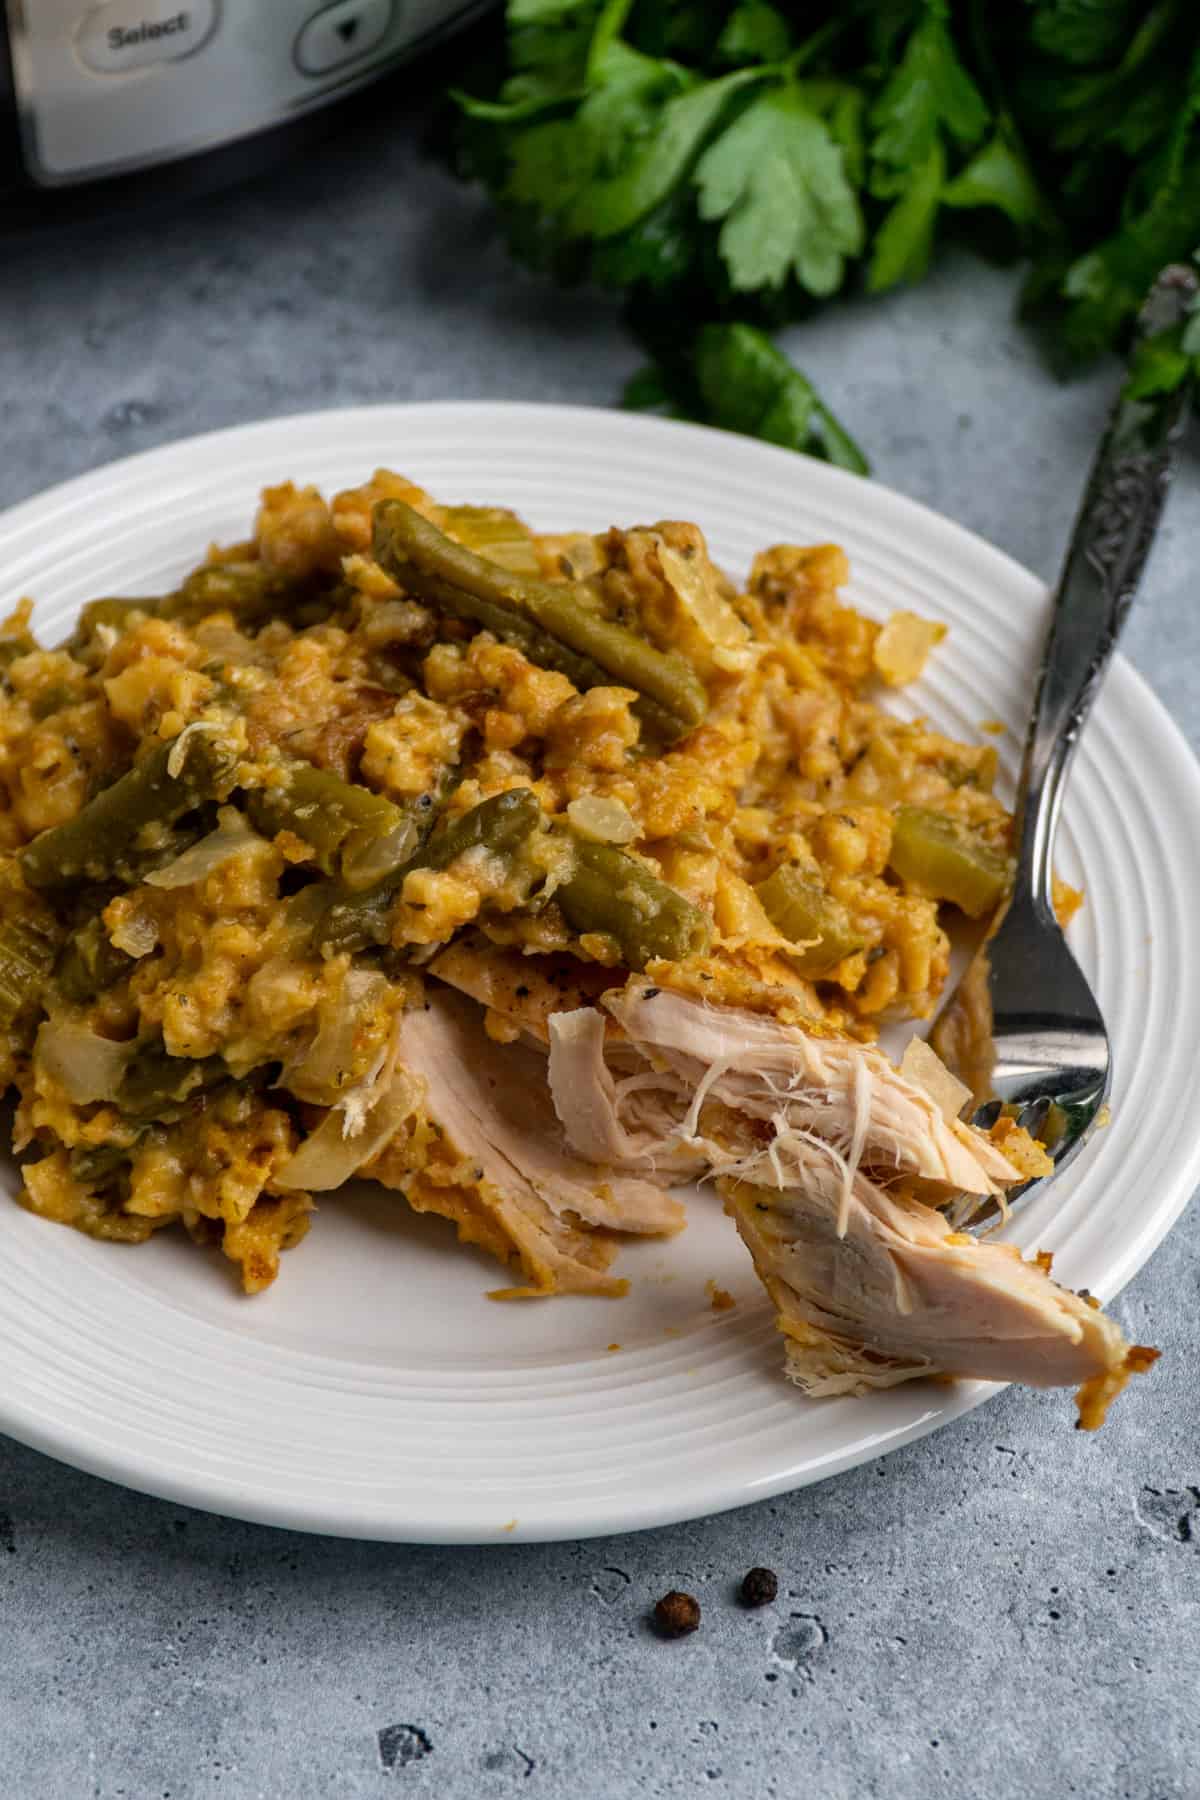 Crock Pot chicken and stuffing on a plate with a piece of chicken on a fork.